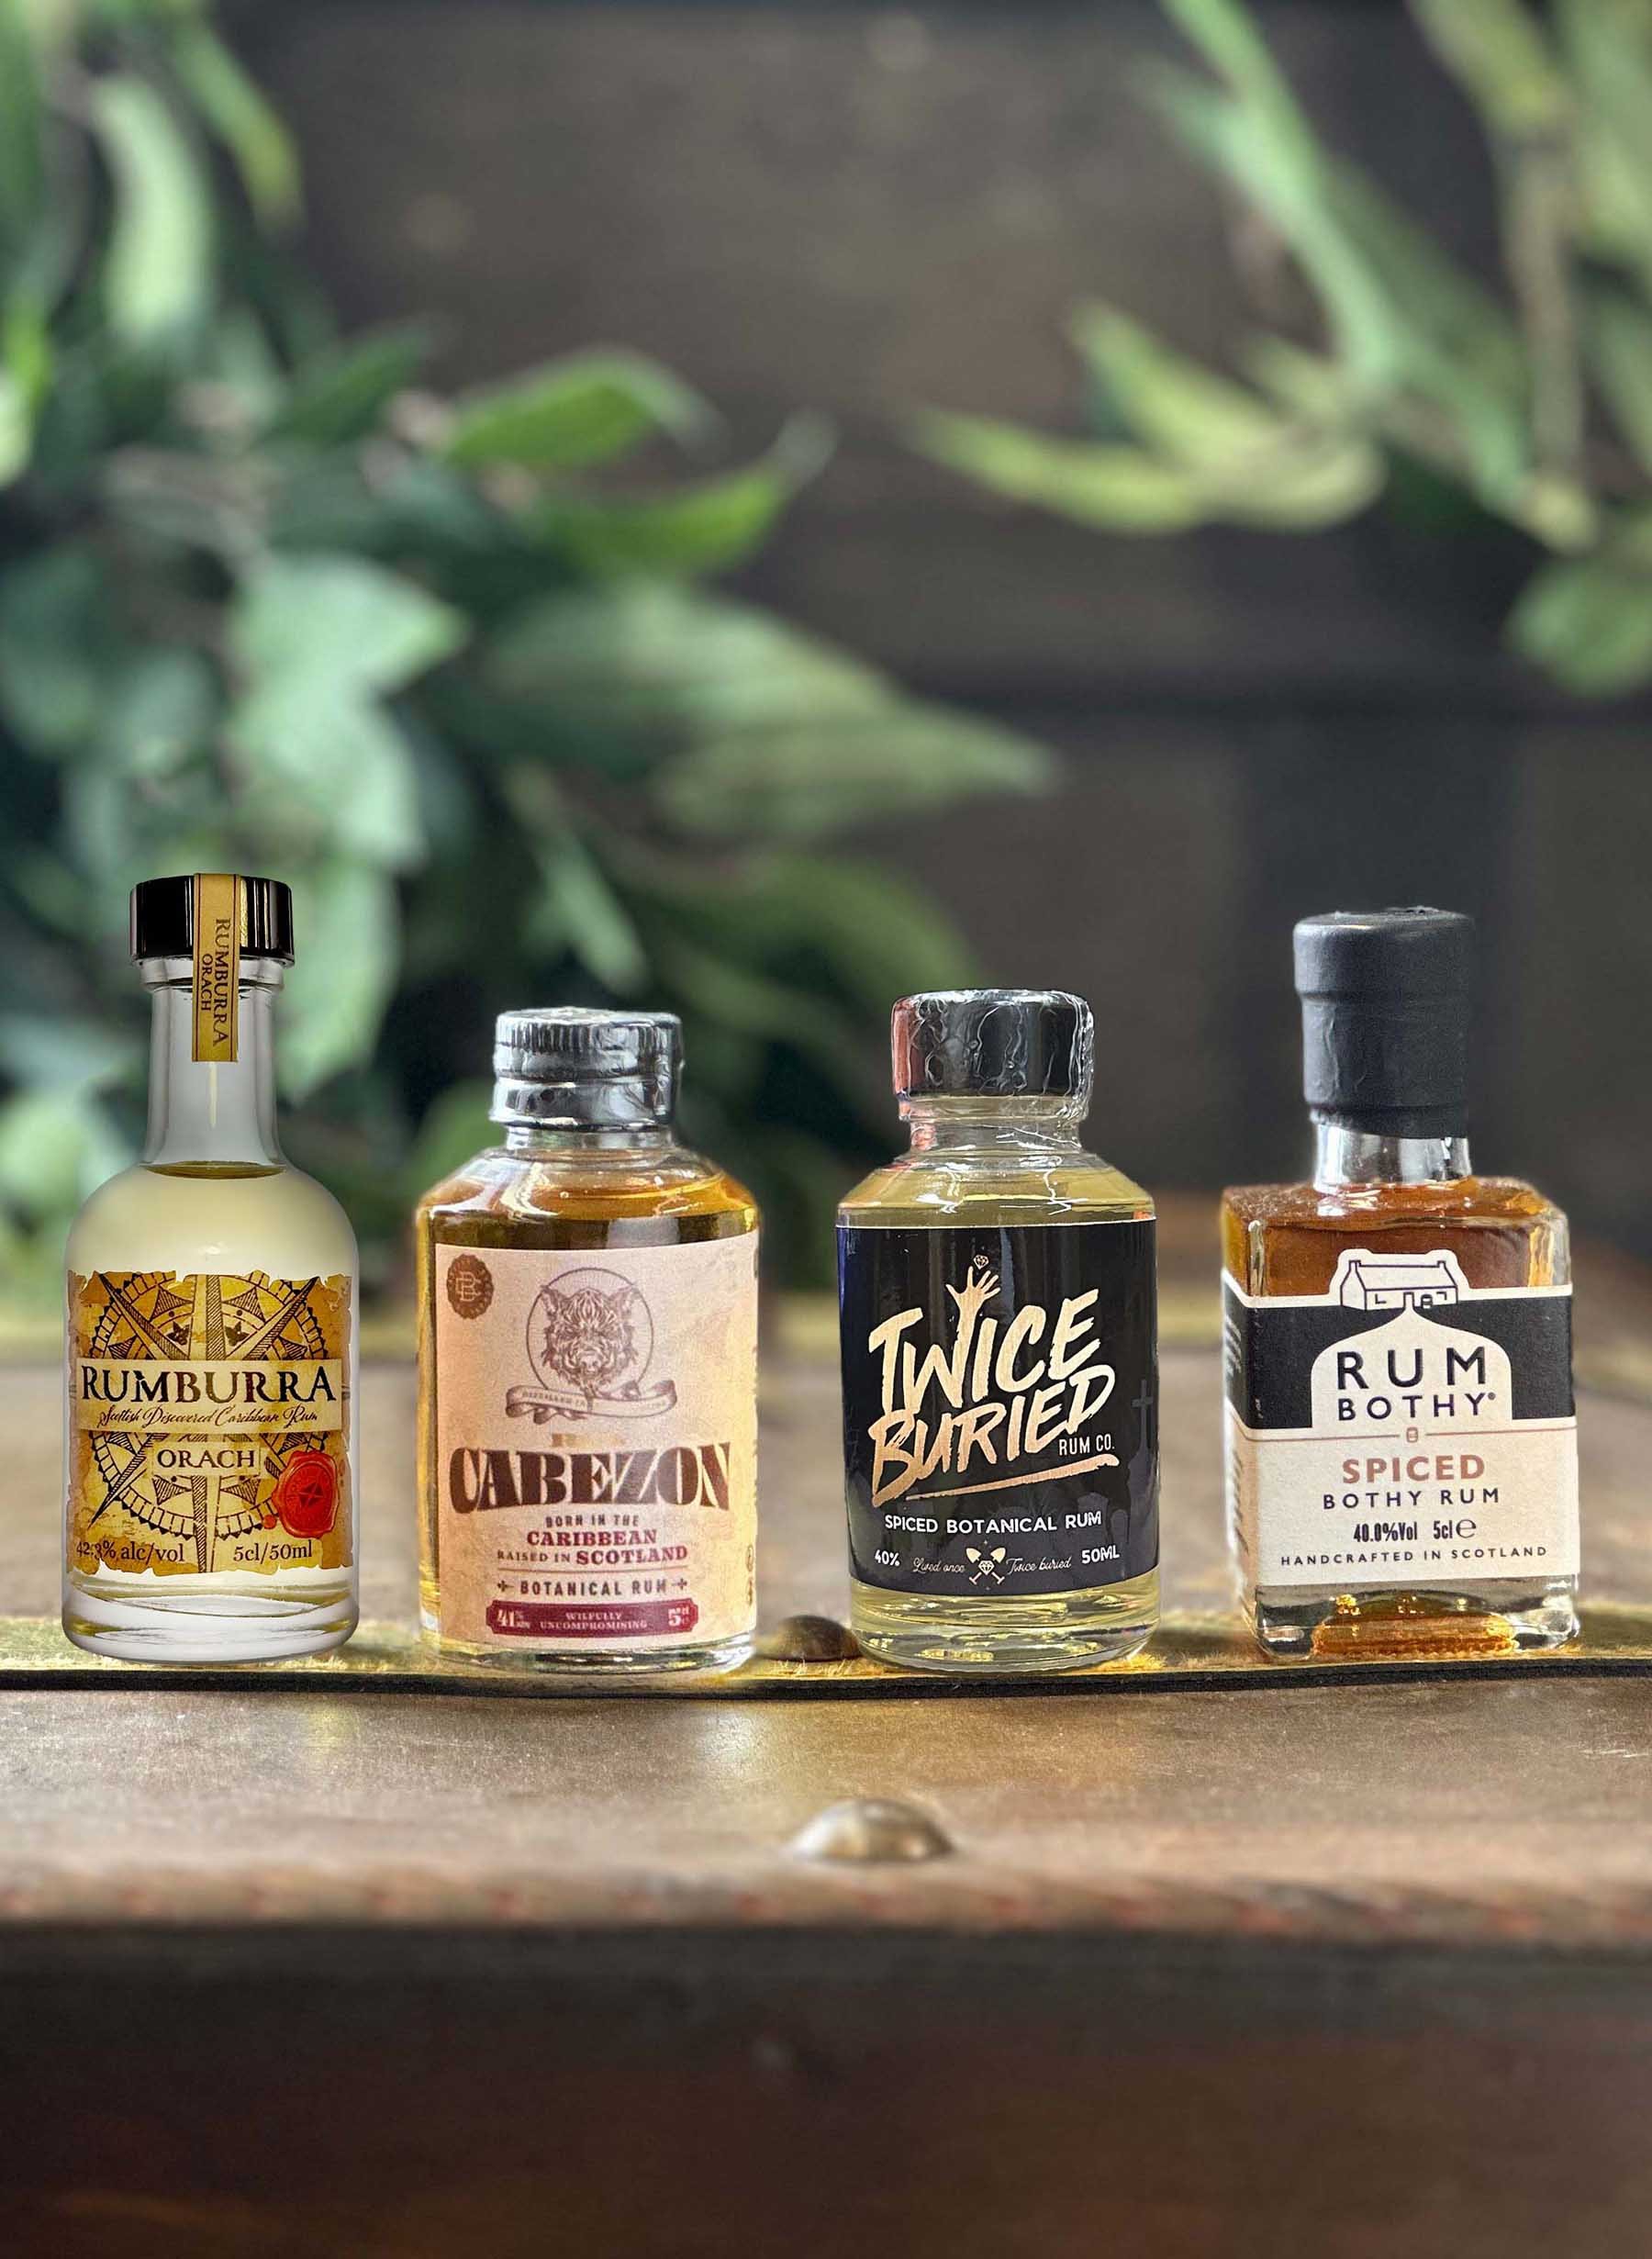 The Ultimate Rum Gift Box (12x50ml) - The Rum Company — The Rum Company -  Buy Rum Online | Rum Subscription | Gift Sets